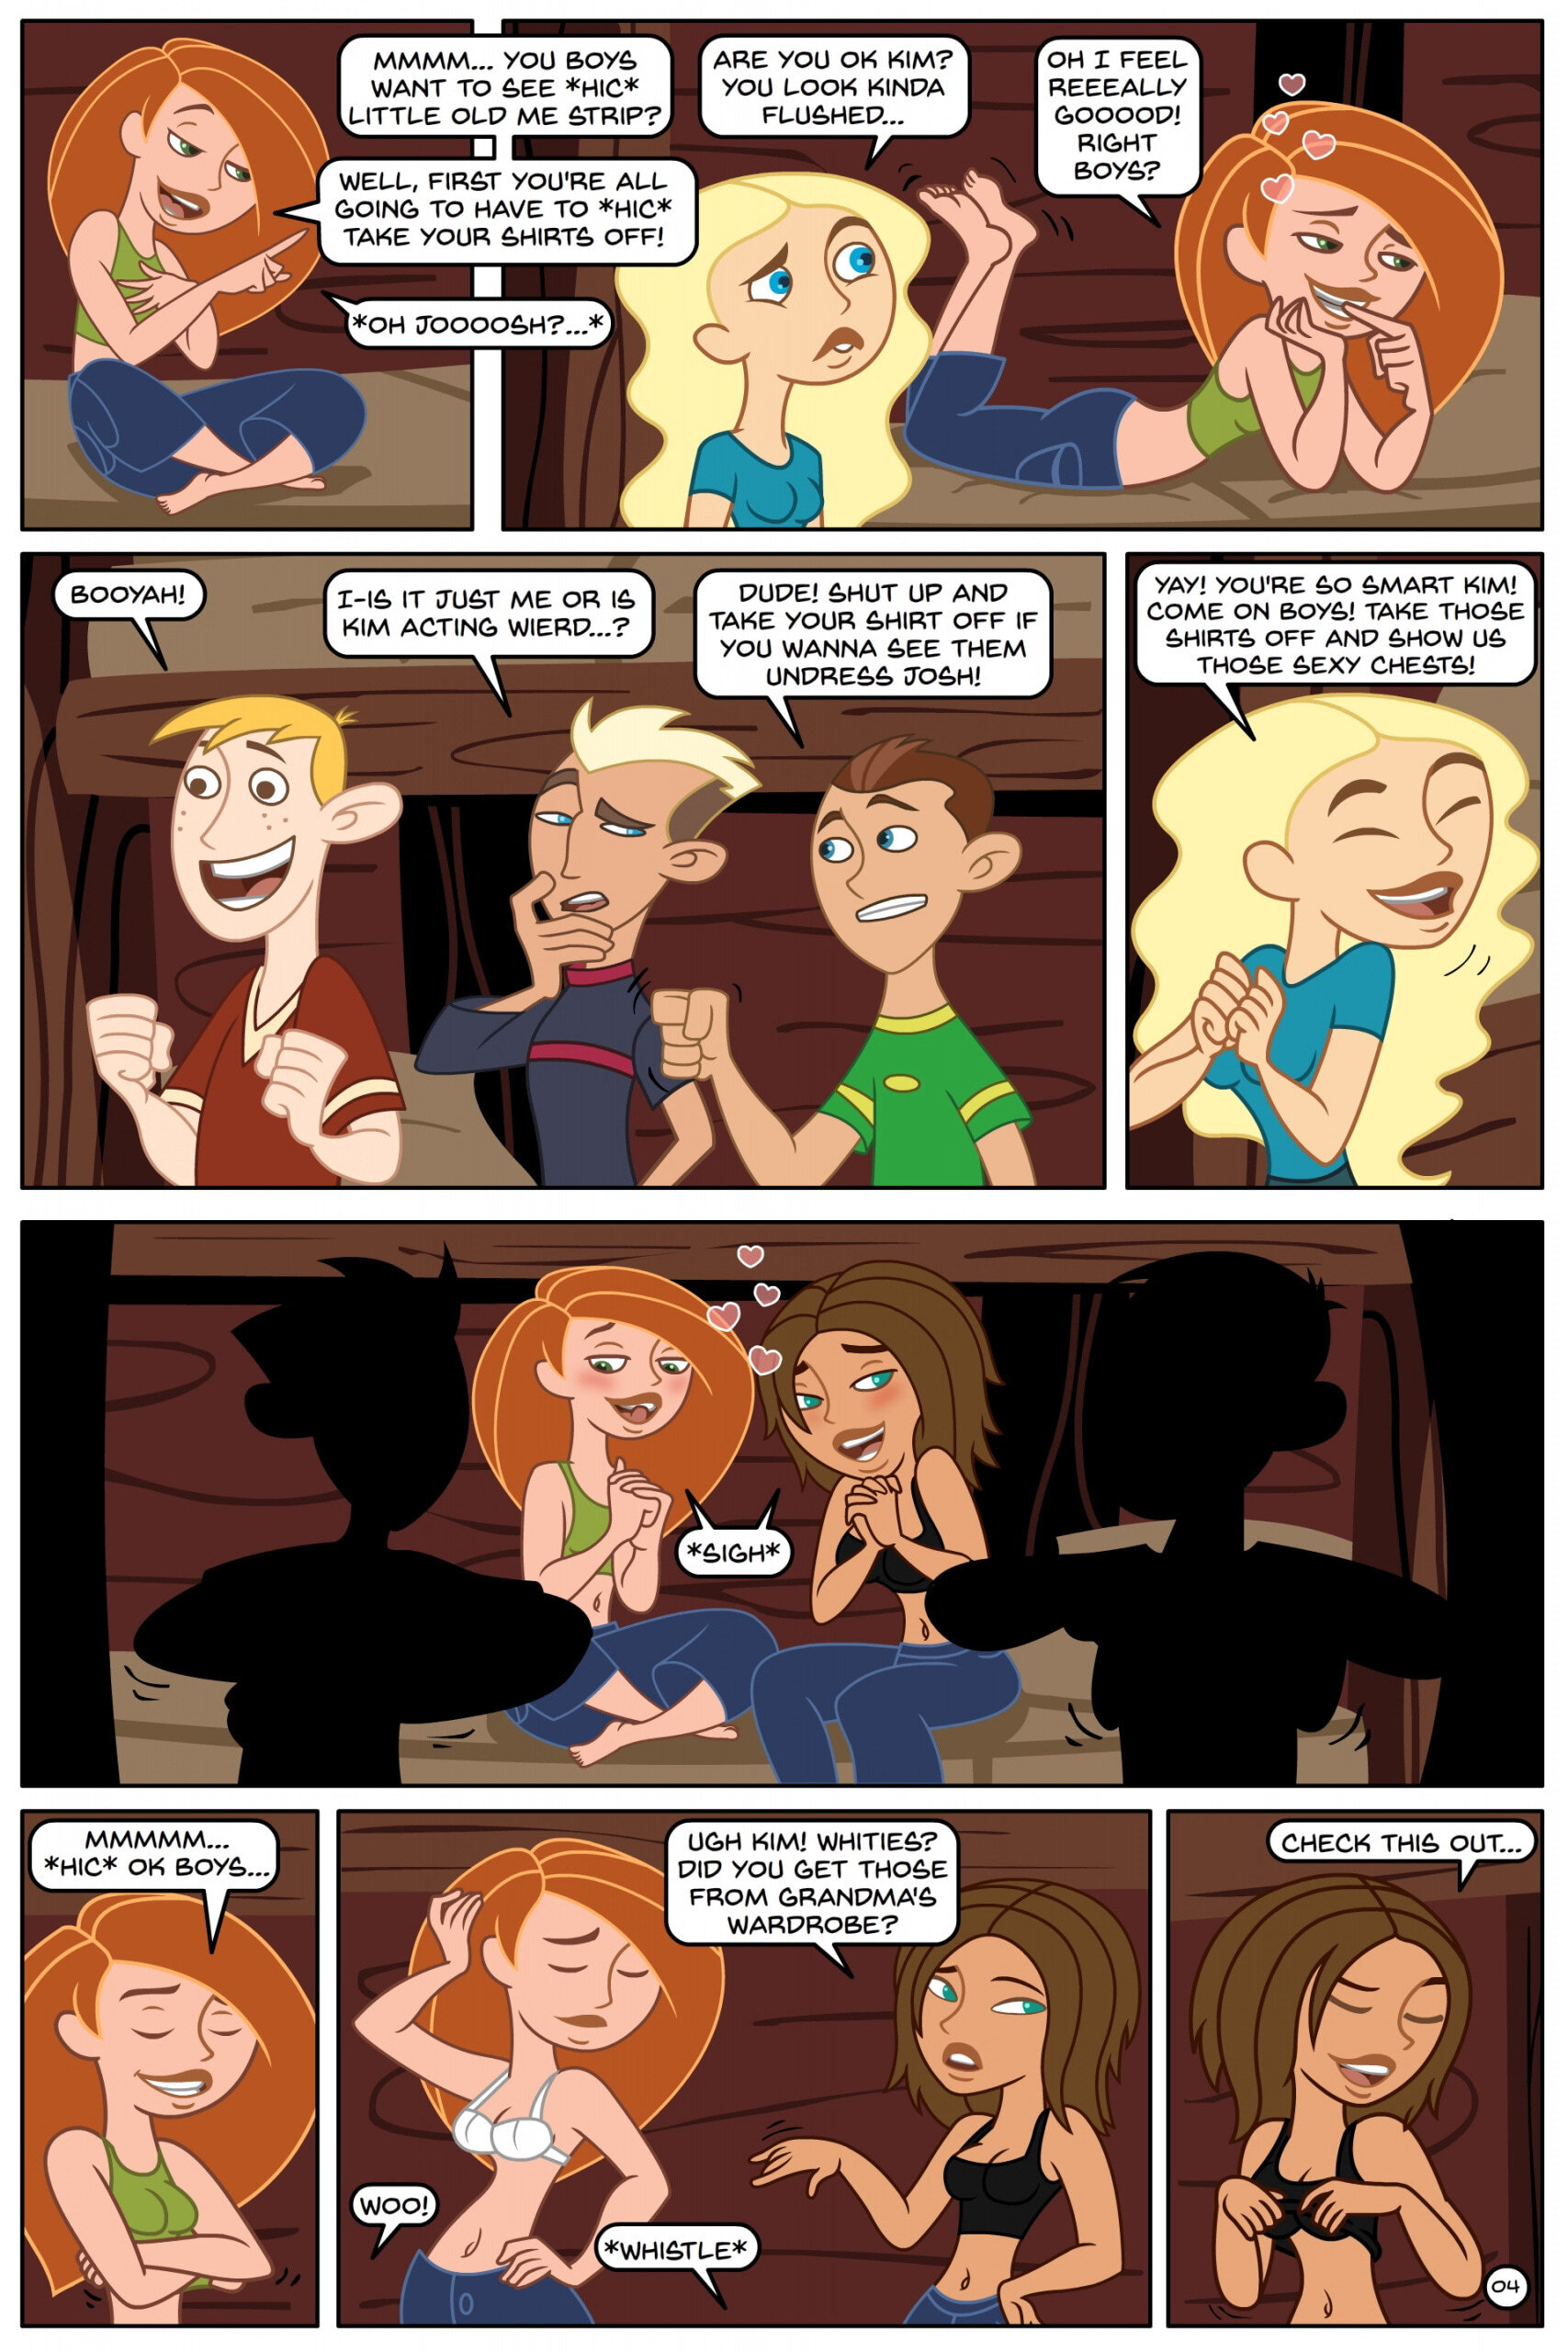 Kim Possible Spin, Sip & Strip! - Page 5